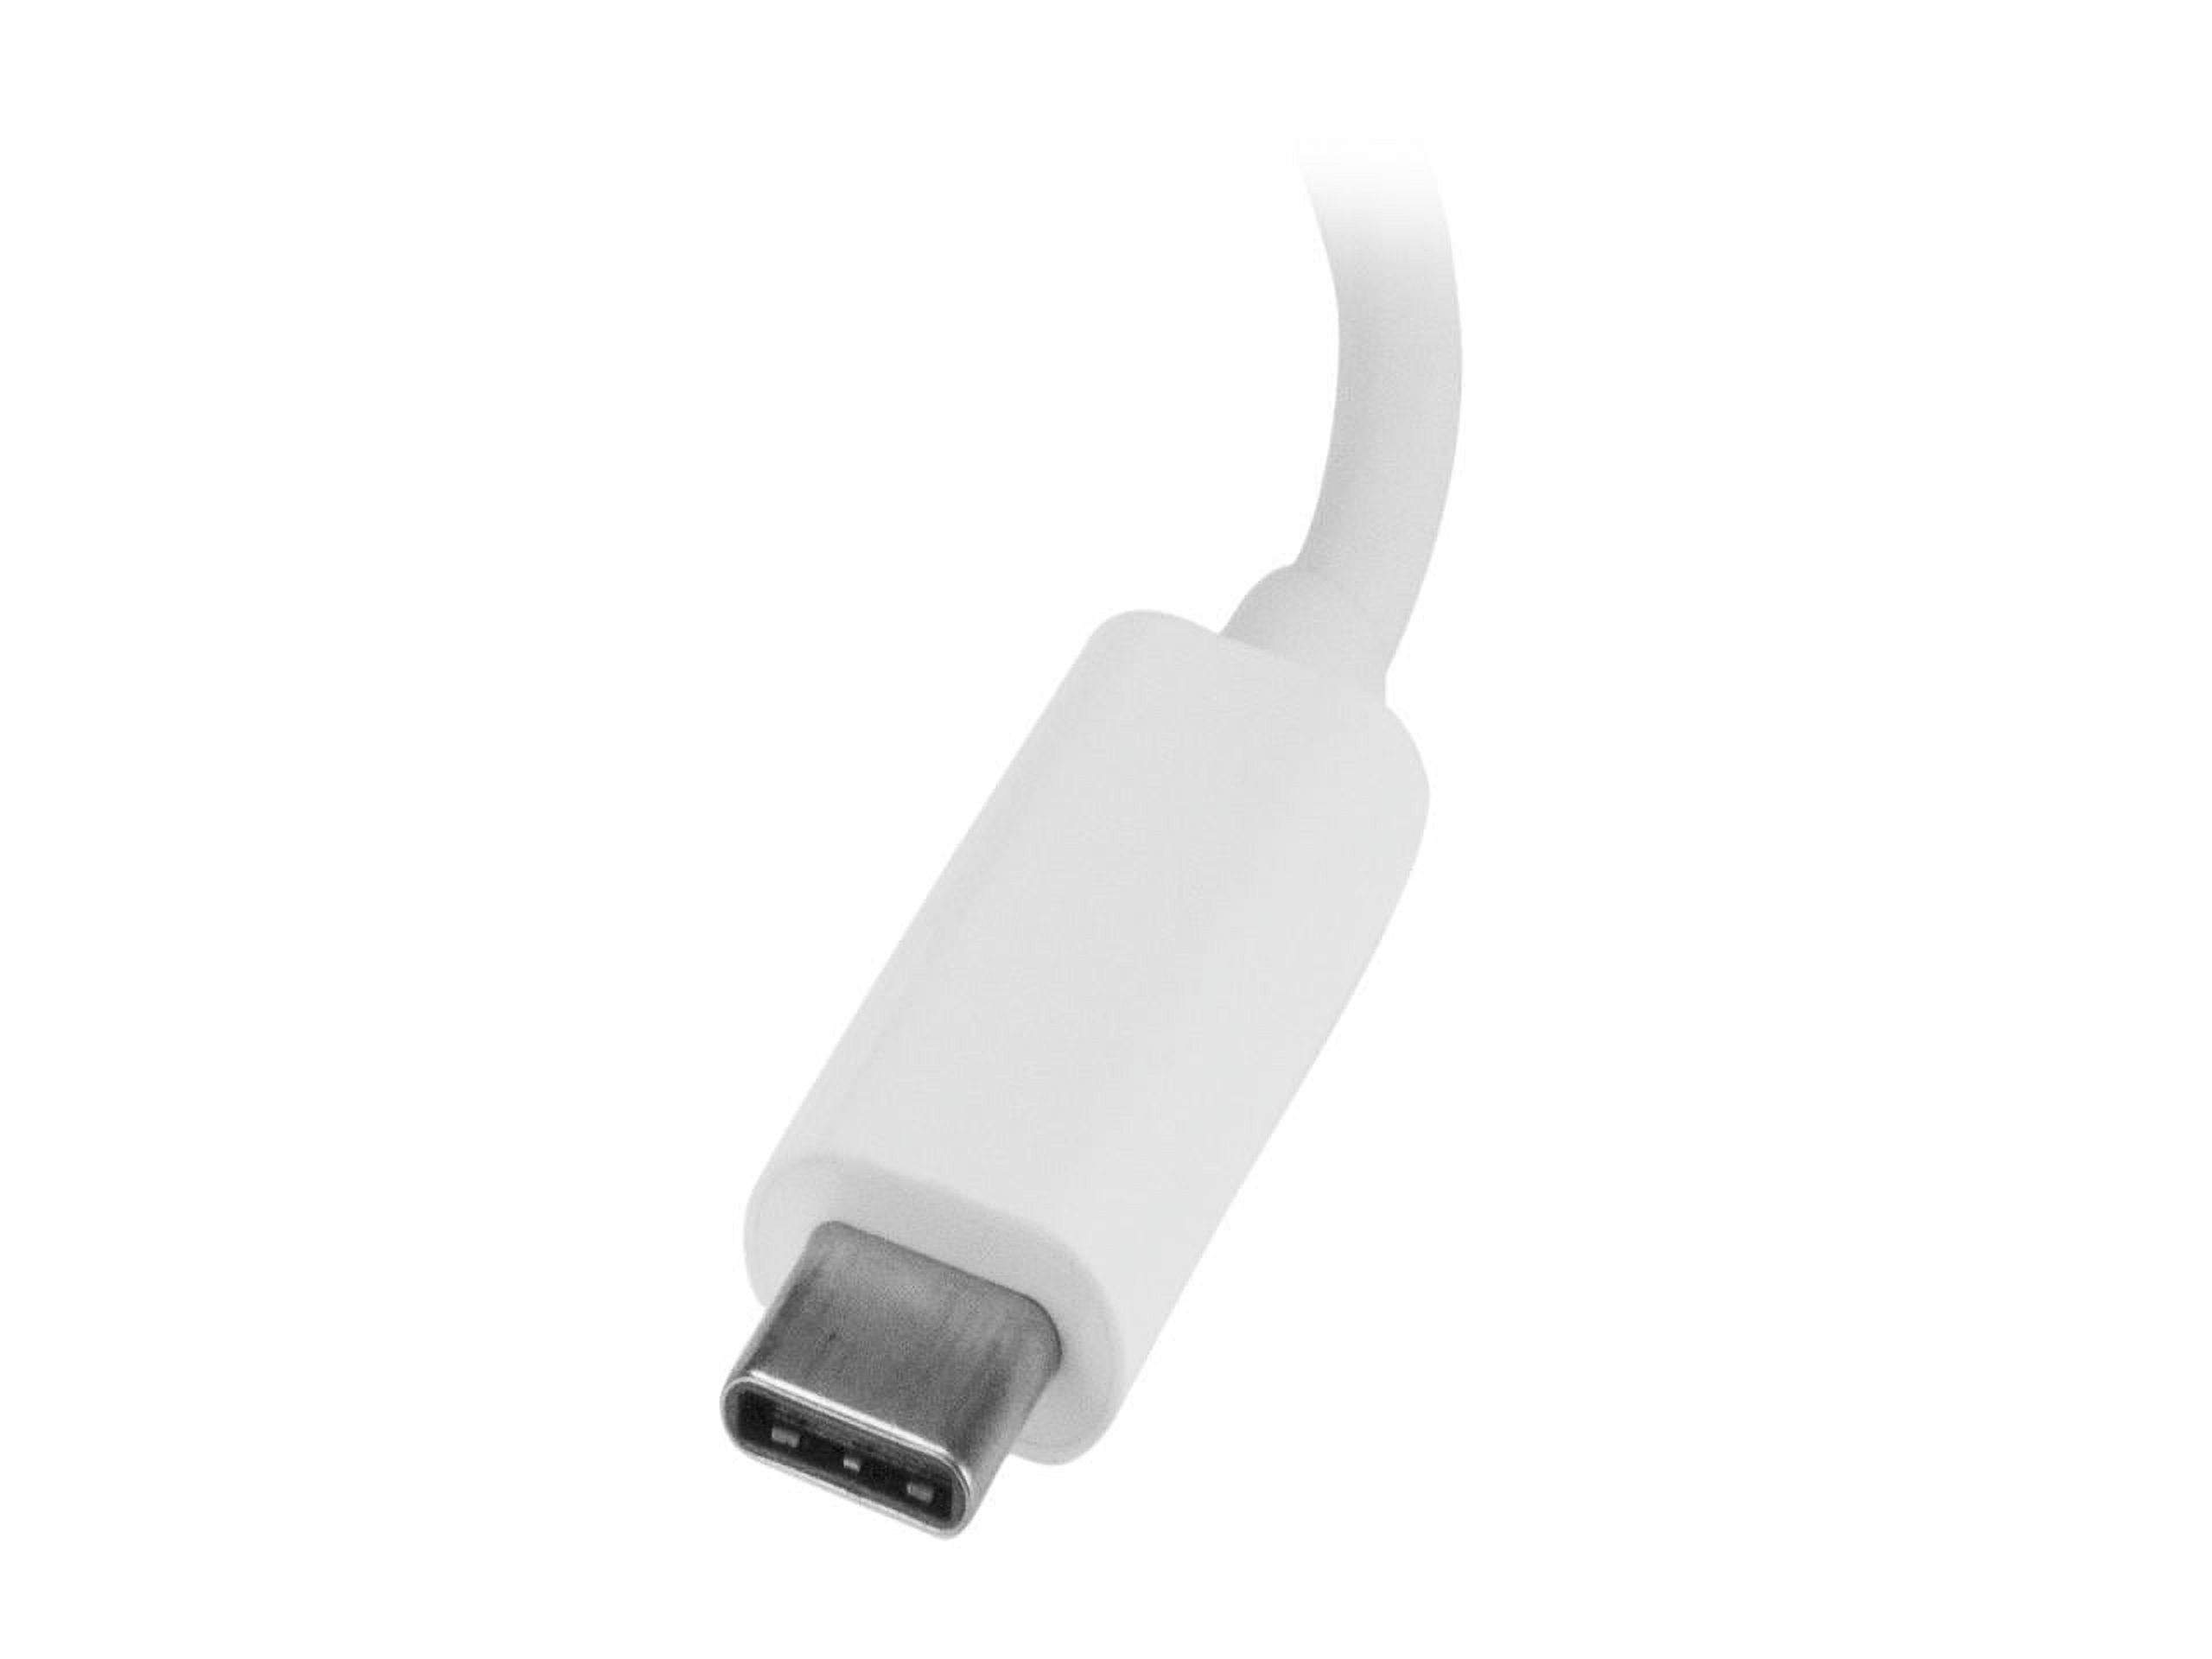 StarTech HB30C3A1GEA USB-C to Ethernet Adapter with 3 Port USB C Hub - Gigabit - White - Thunderbolt 3 Compatible - MacBook Pro 2016 - image 3 of 4